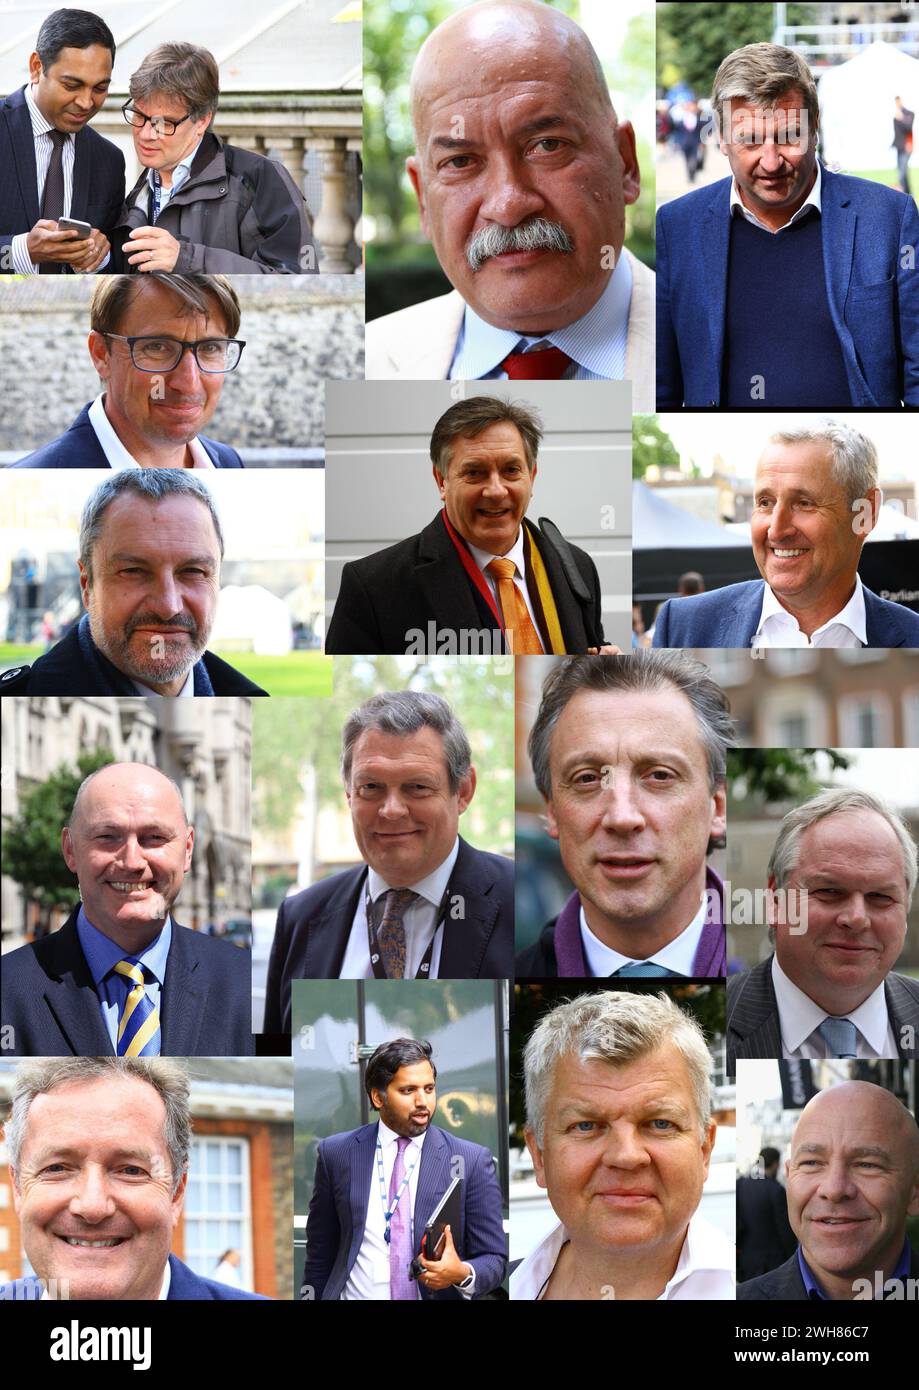 Journalists, Radio and Television presenters, Writers and Documentary makers in the United Kingdom. Left to right: Nickolas Watt and colleague, John Pienaar, Laurence Lee, Jason Farrell, Gavin Esler, Simon McCoy, Mark Austin, Ian Woods, John Craig, Tom Dunn, Adam Boulton, Piers Morgan , Faisal Islam, Adrian Chiles, Dominic Littlewood. Search Russell Moore portfolio page for more images . Stock Photo